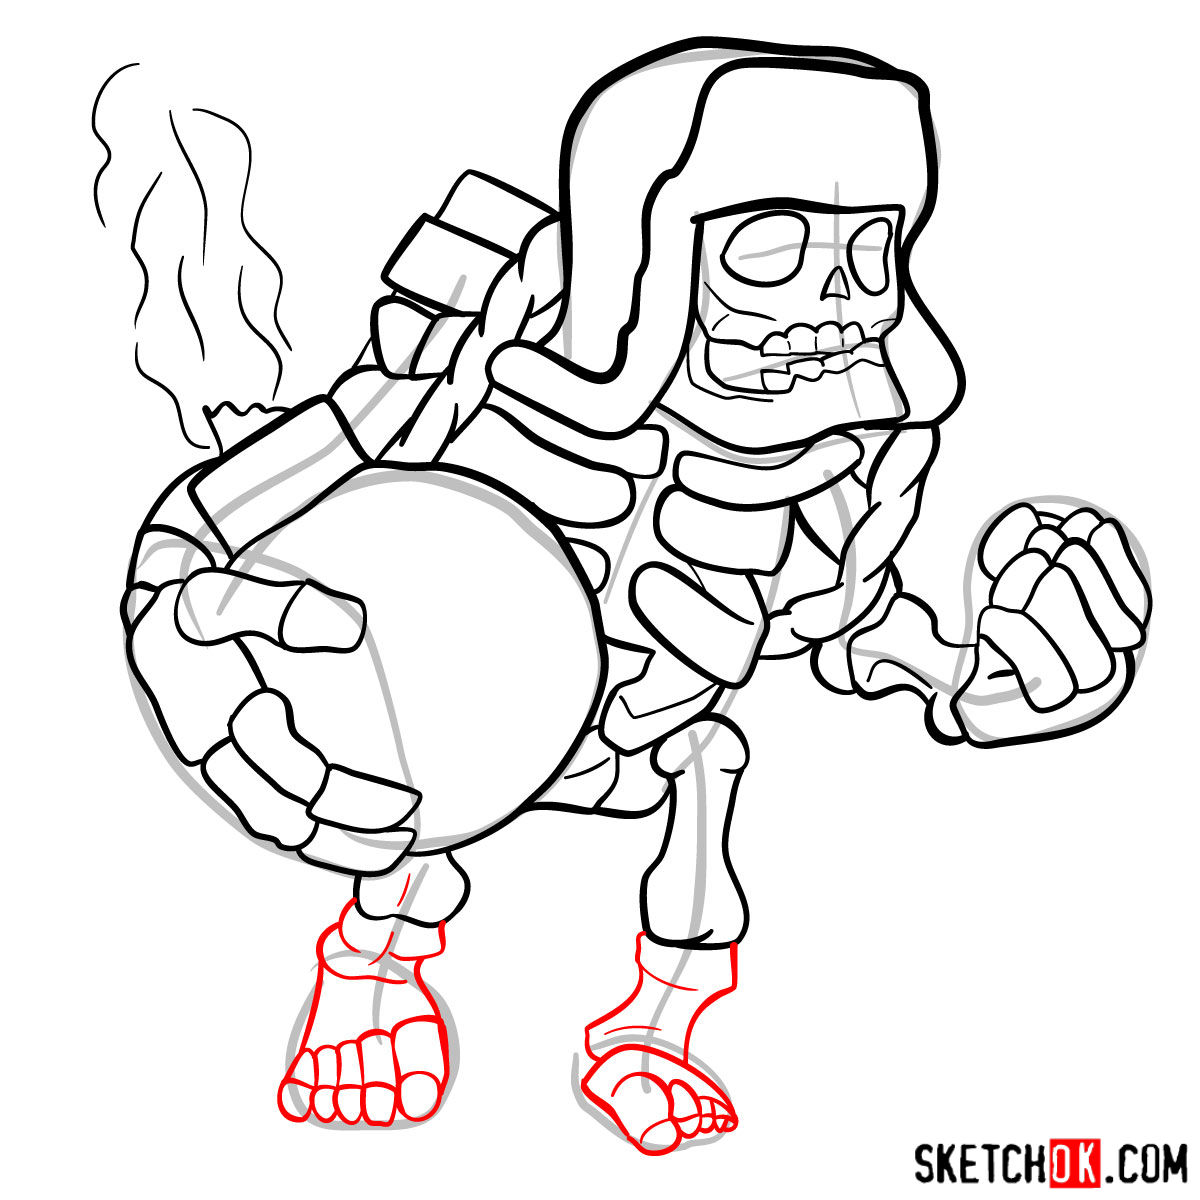 How to draw Giant Skeleton from Clash of Clans - step 11